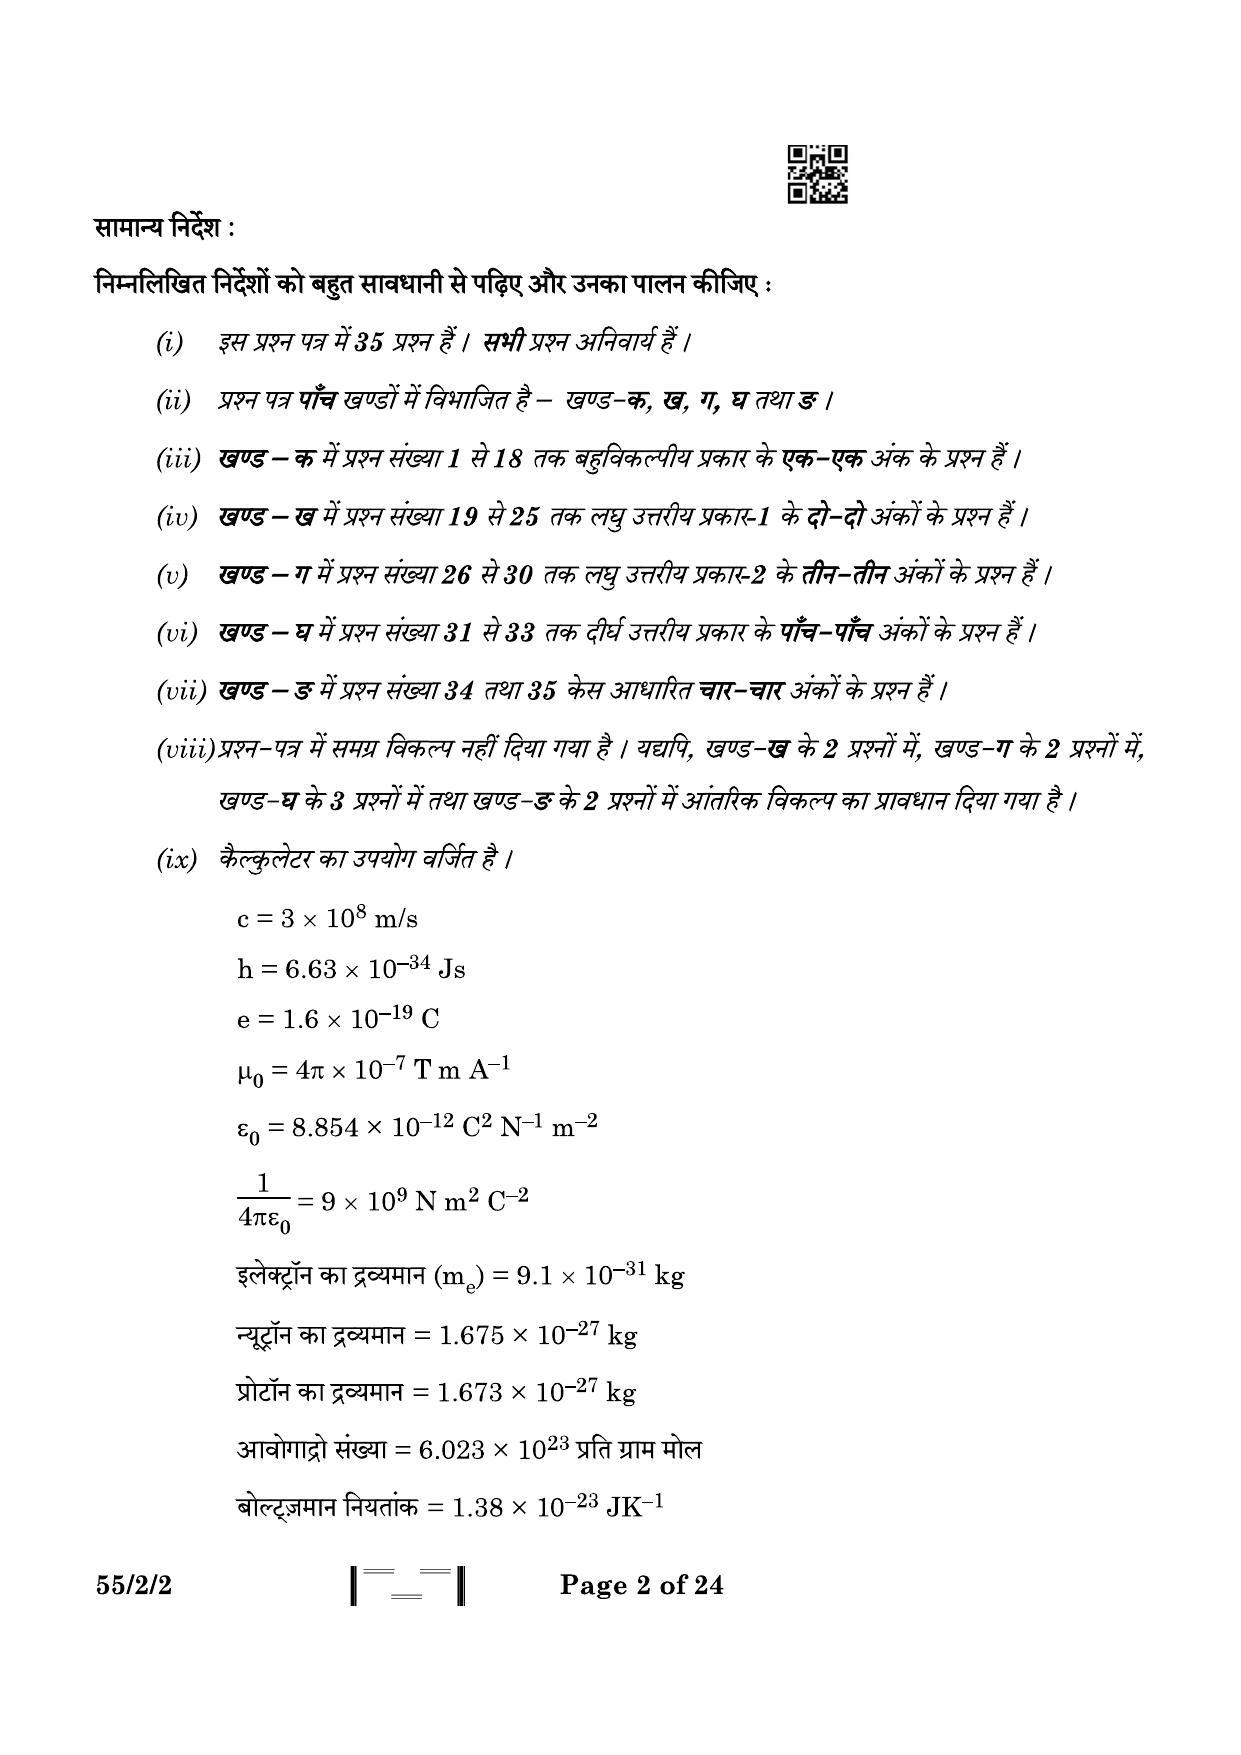 CBSE Class 12 55-2-2 Physics 2023 Question Paper - Page 2